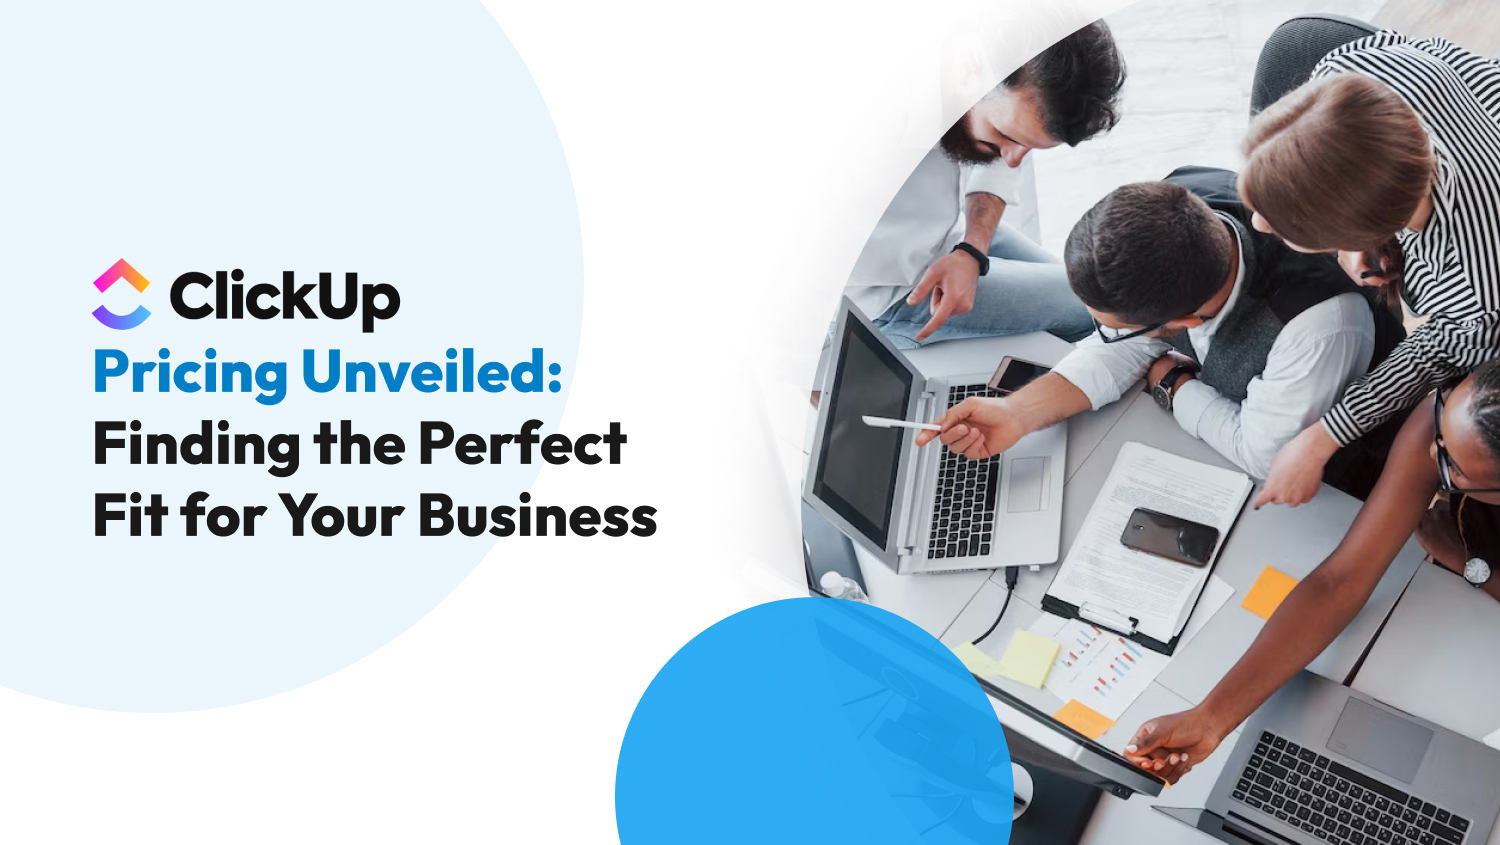 ClickUp Pricing Unveiled: Finding the Perfect Fit for Your Business